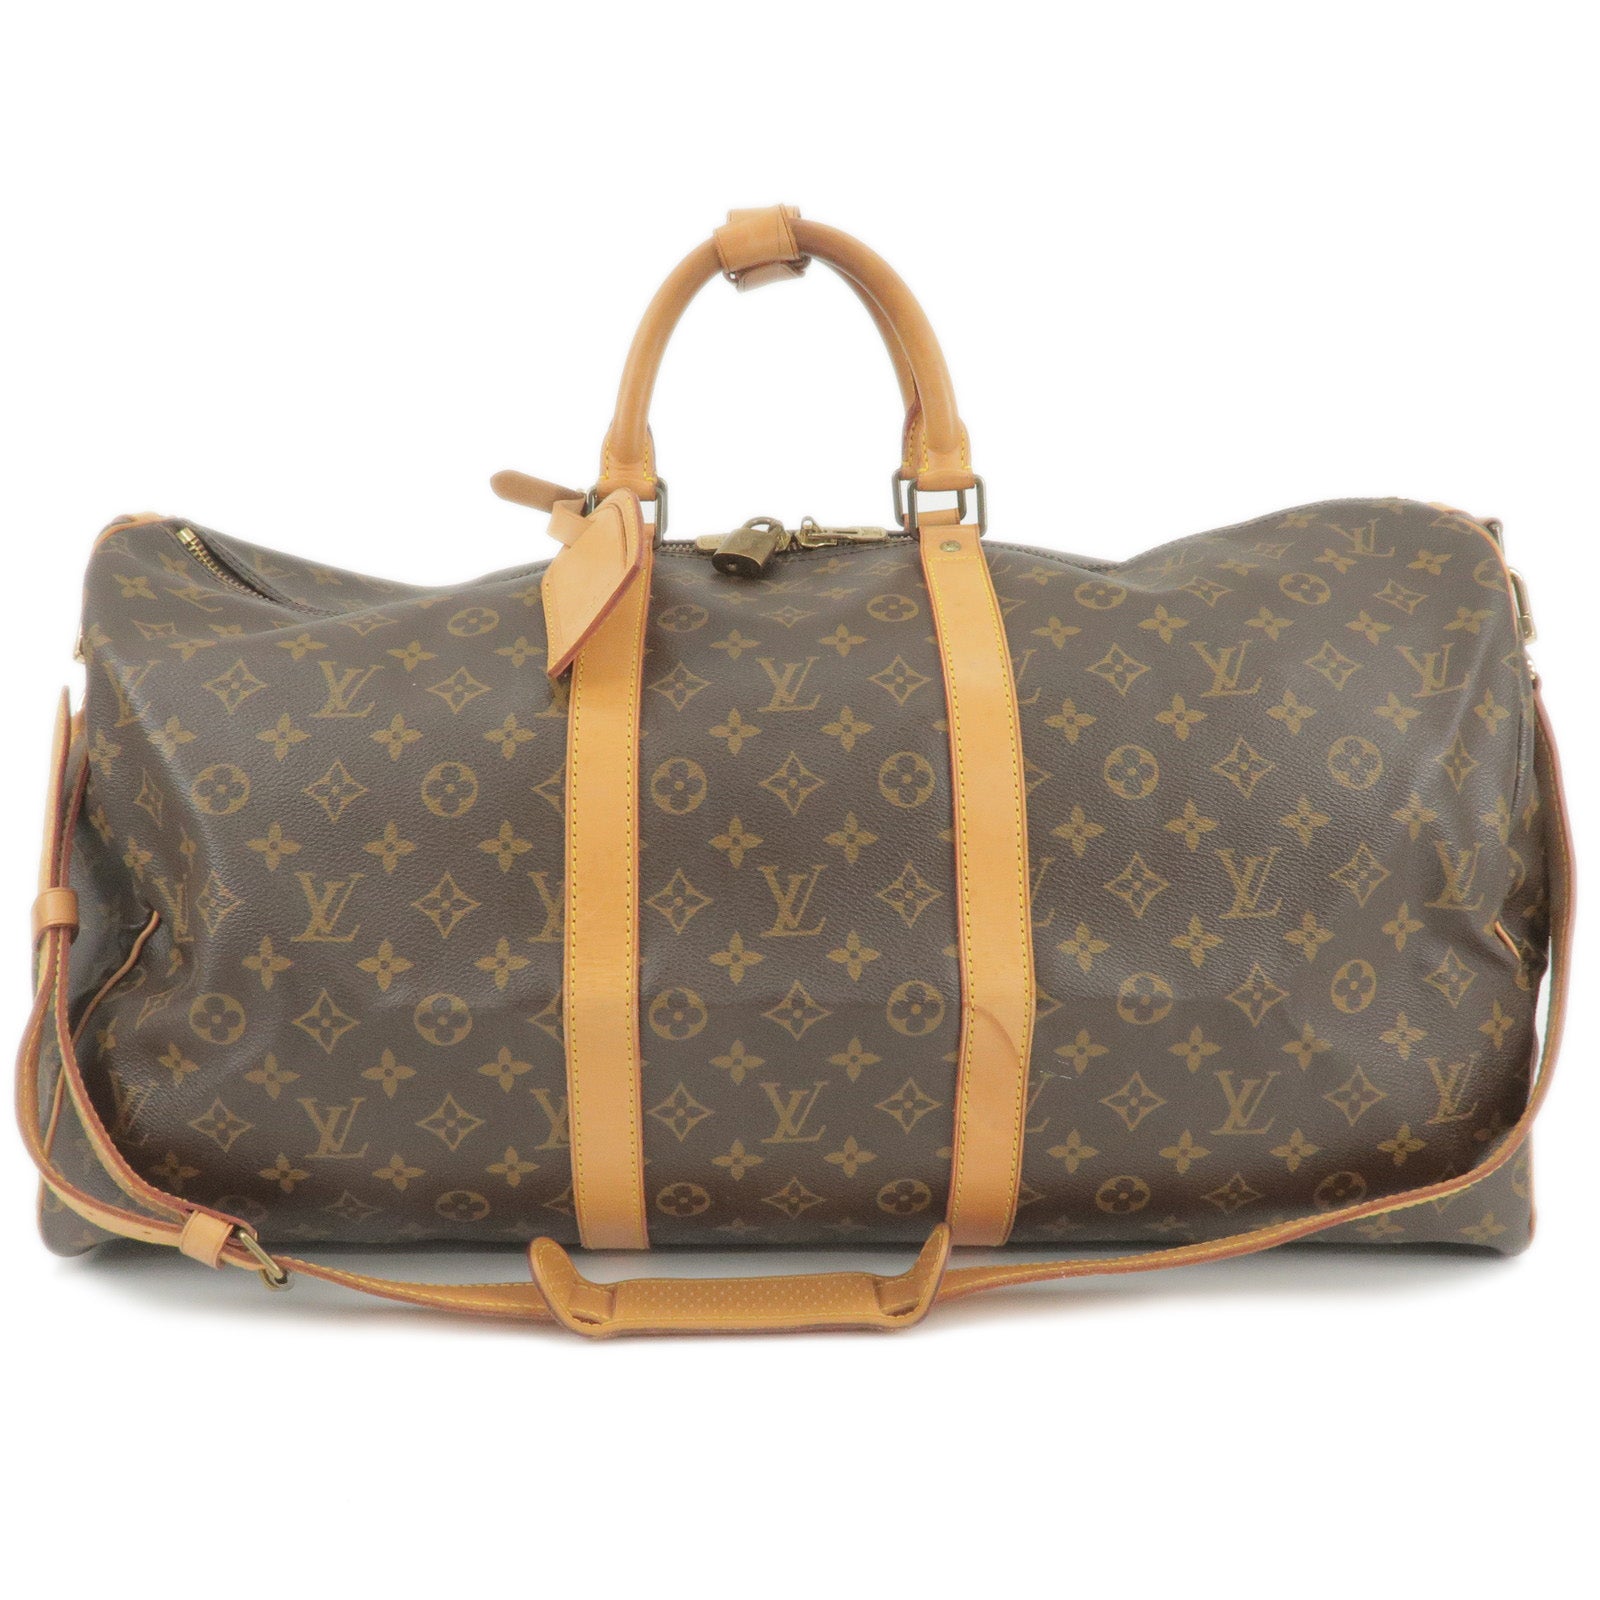 Louis Vuitton Keepall Bandouliere 55 - 2010s second hand vintage